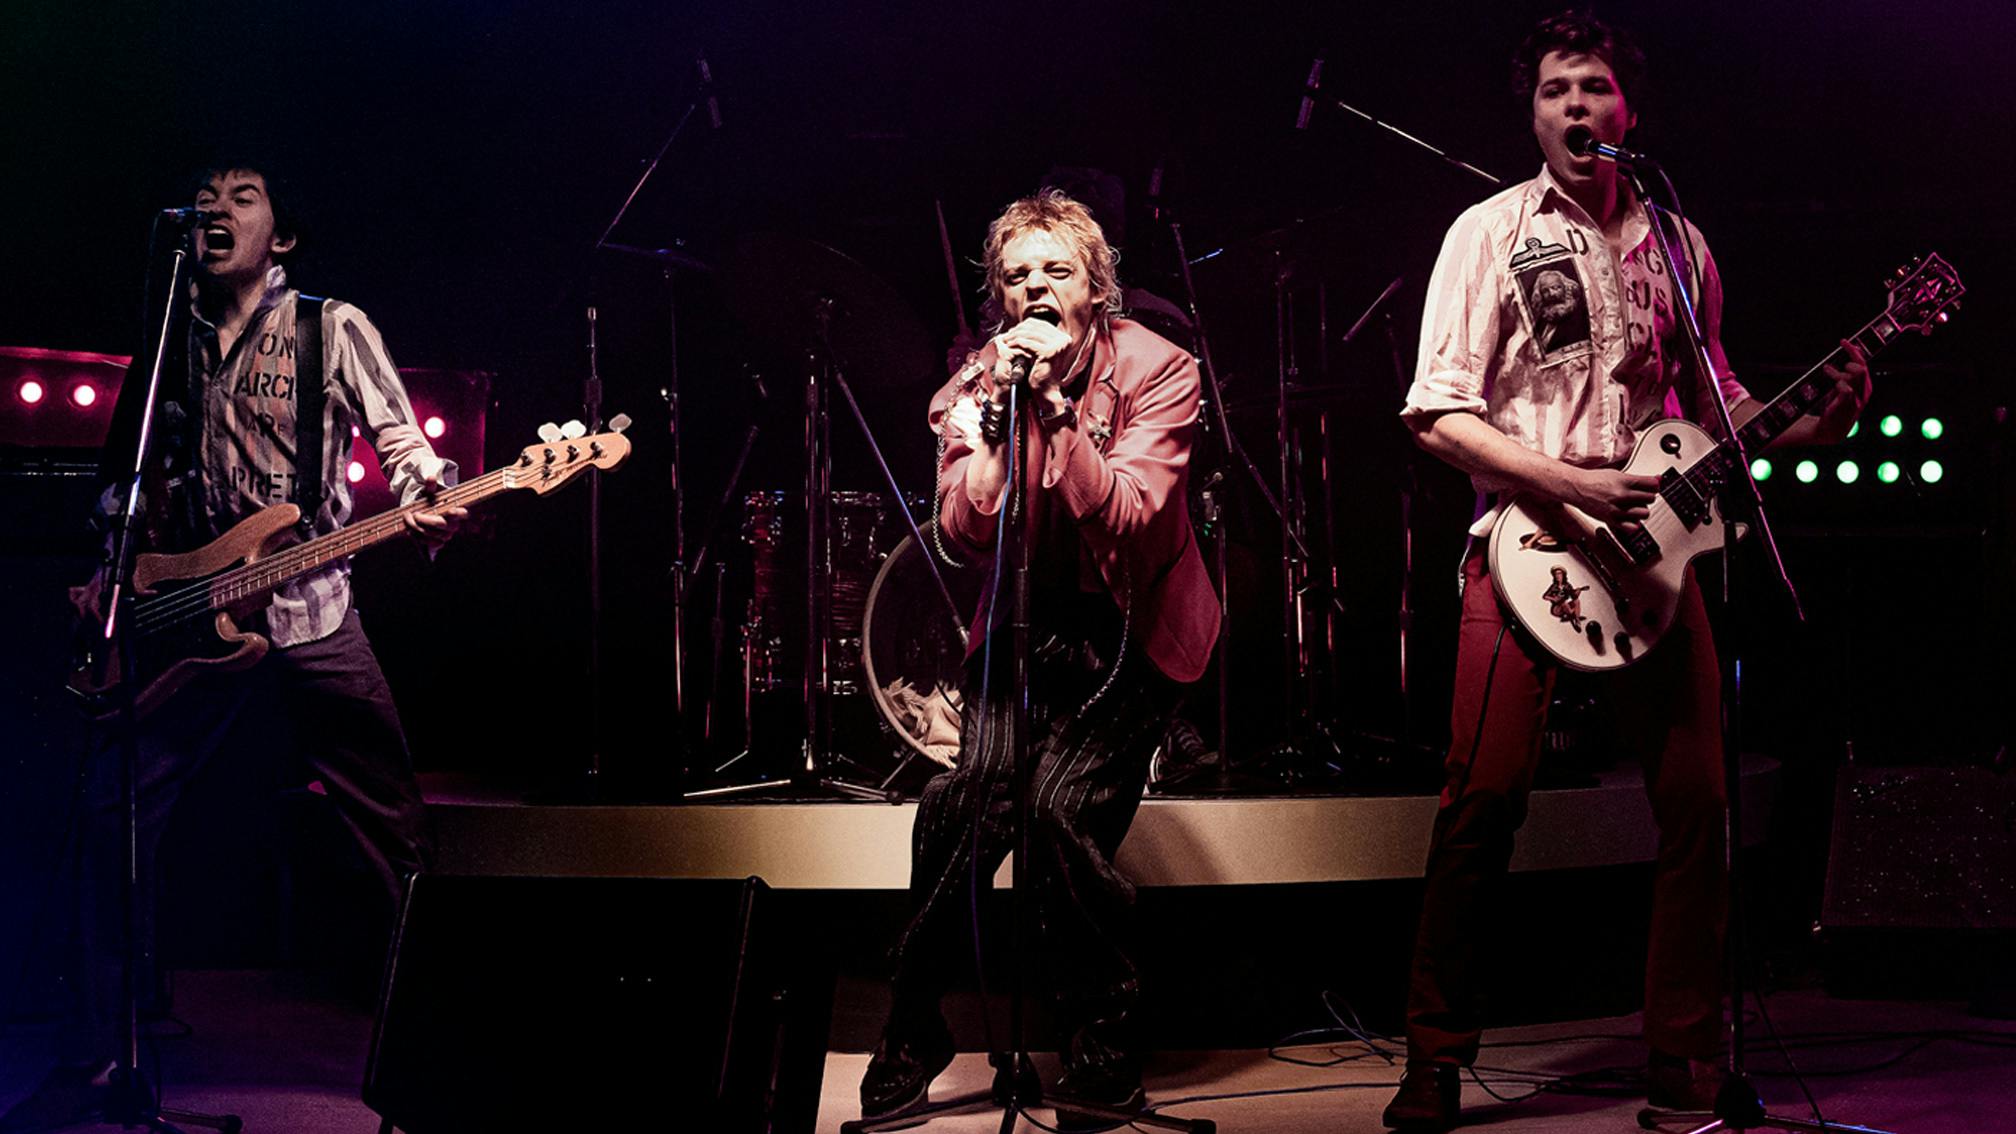 Check out the first look at Danny Boyle's Sex Pistols biopic TV series